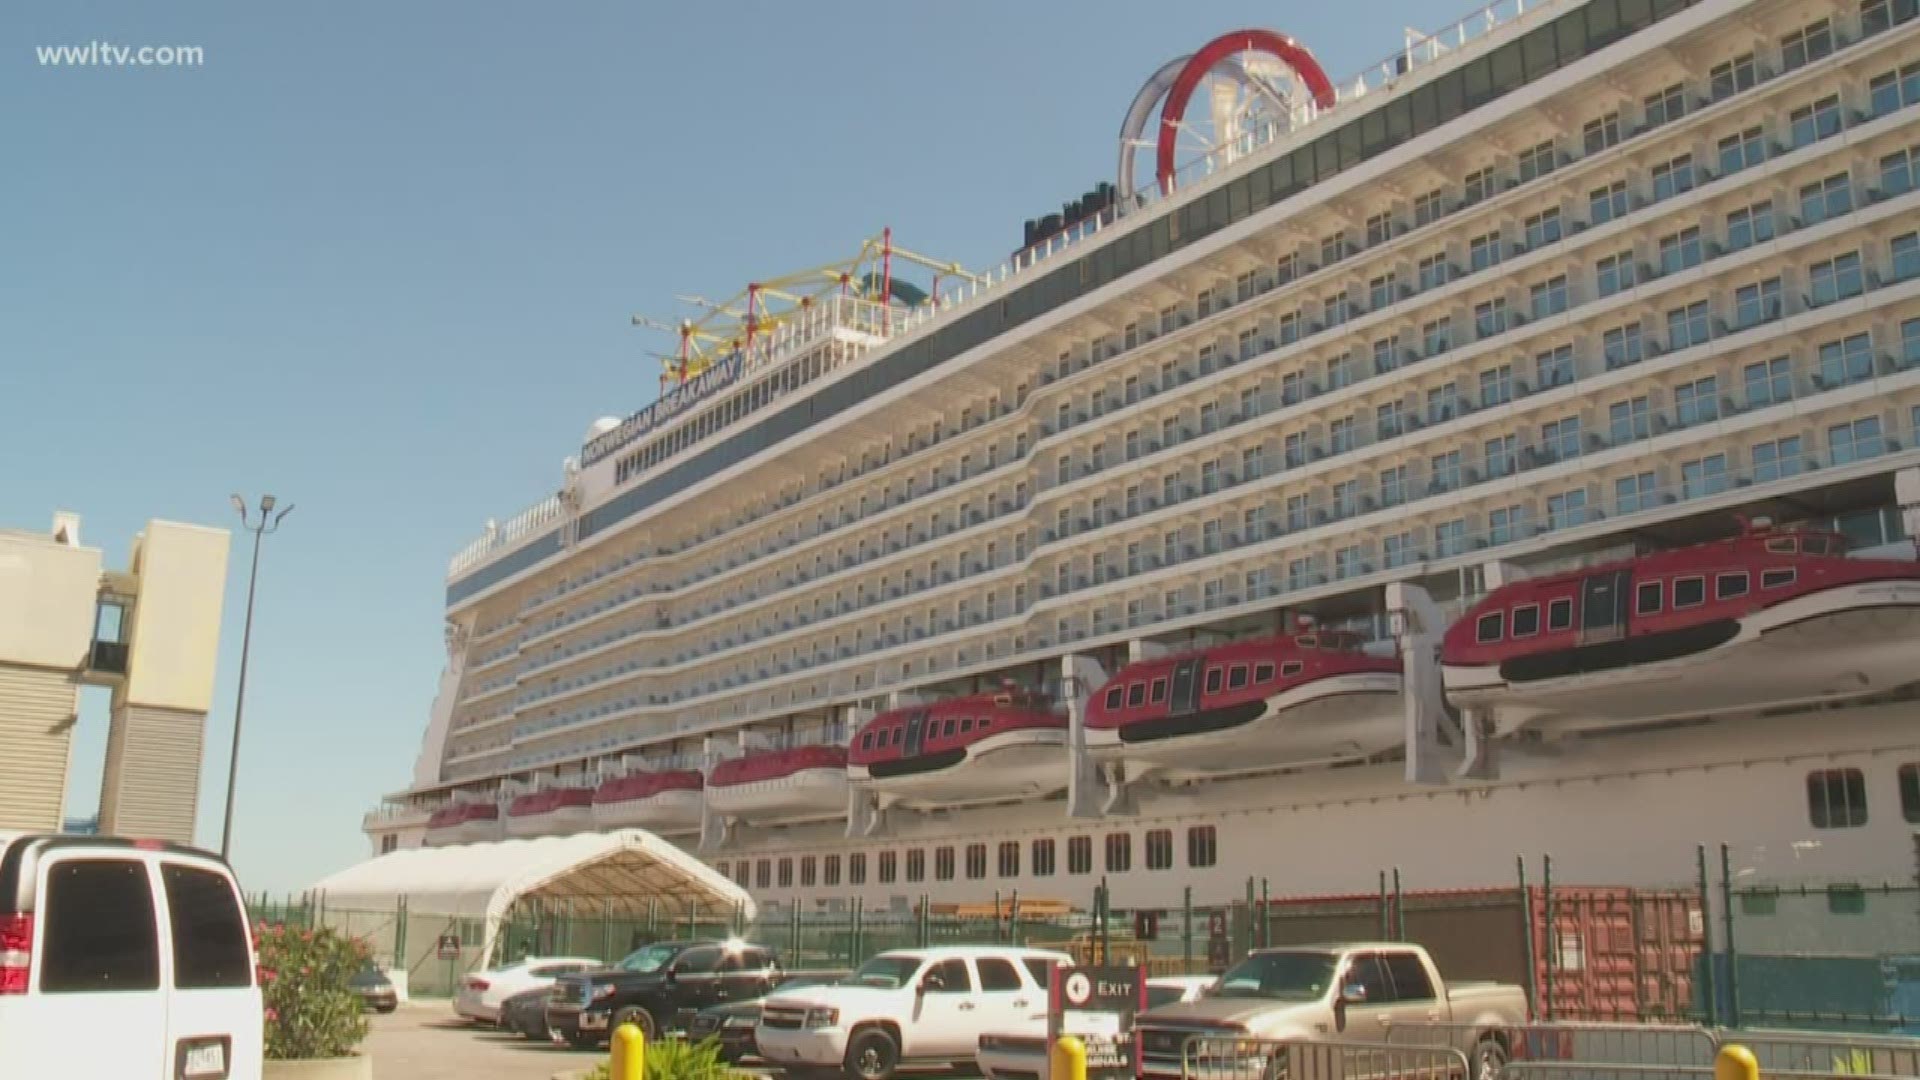 It was controlled chaos at the Port of New Orleans Tuesday as thousands of passengers bound for the Bahamas were instead diverted away from Hurricane Dorian.